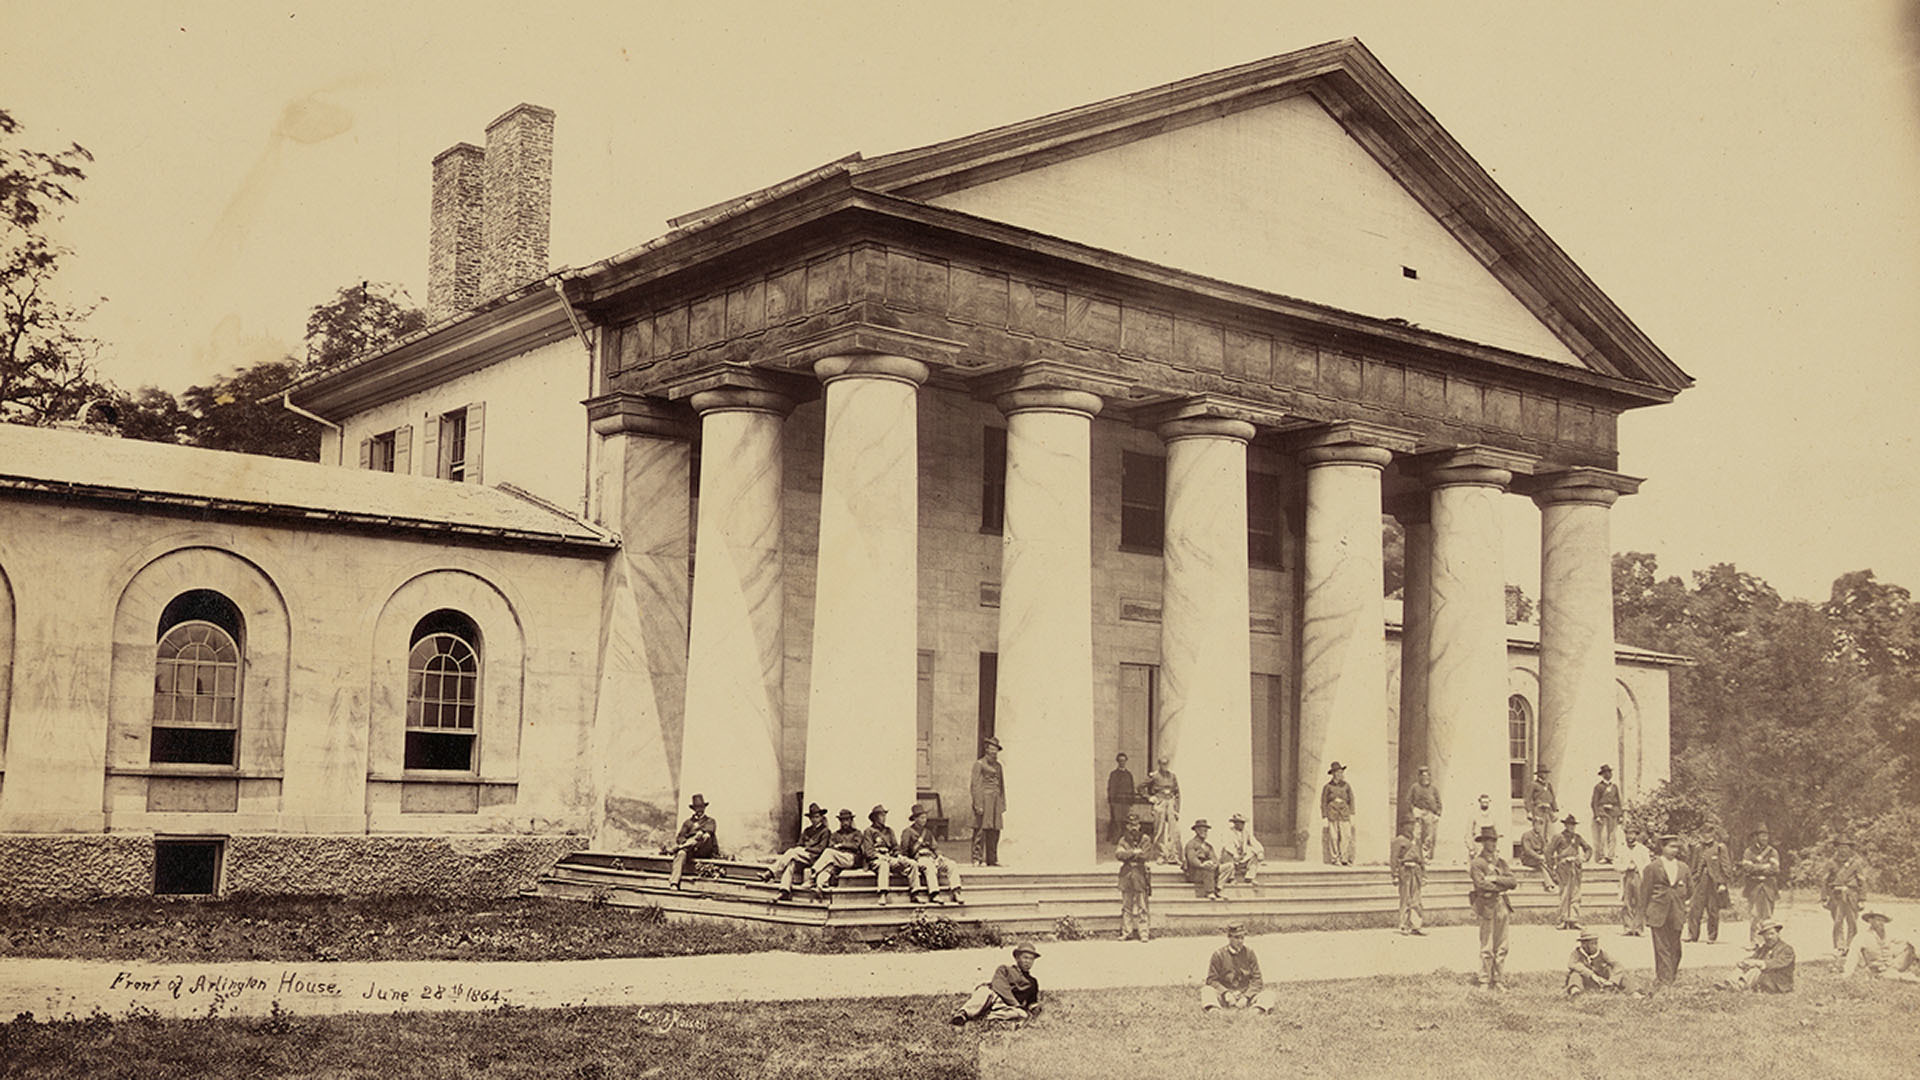 A sepia-toned photo of Union soldiers gathered outside Robert E. Lee's large home, which has grand columns outside it, in Arlington, Virginia, circa 1864.